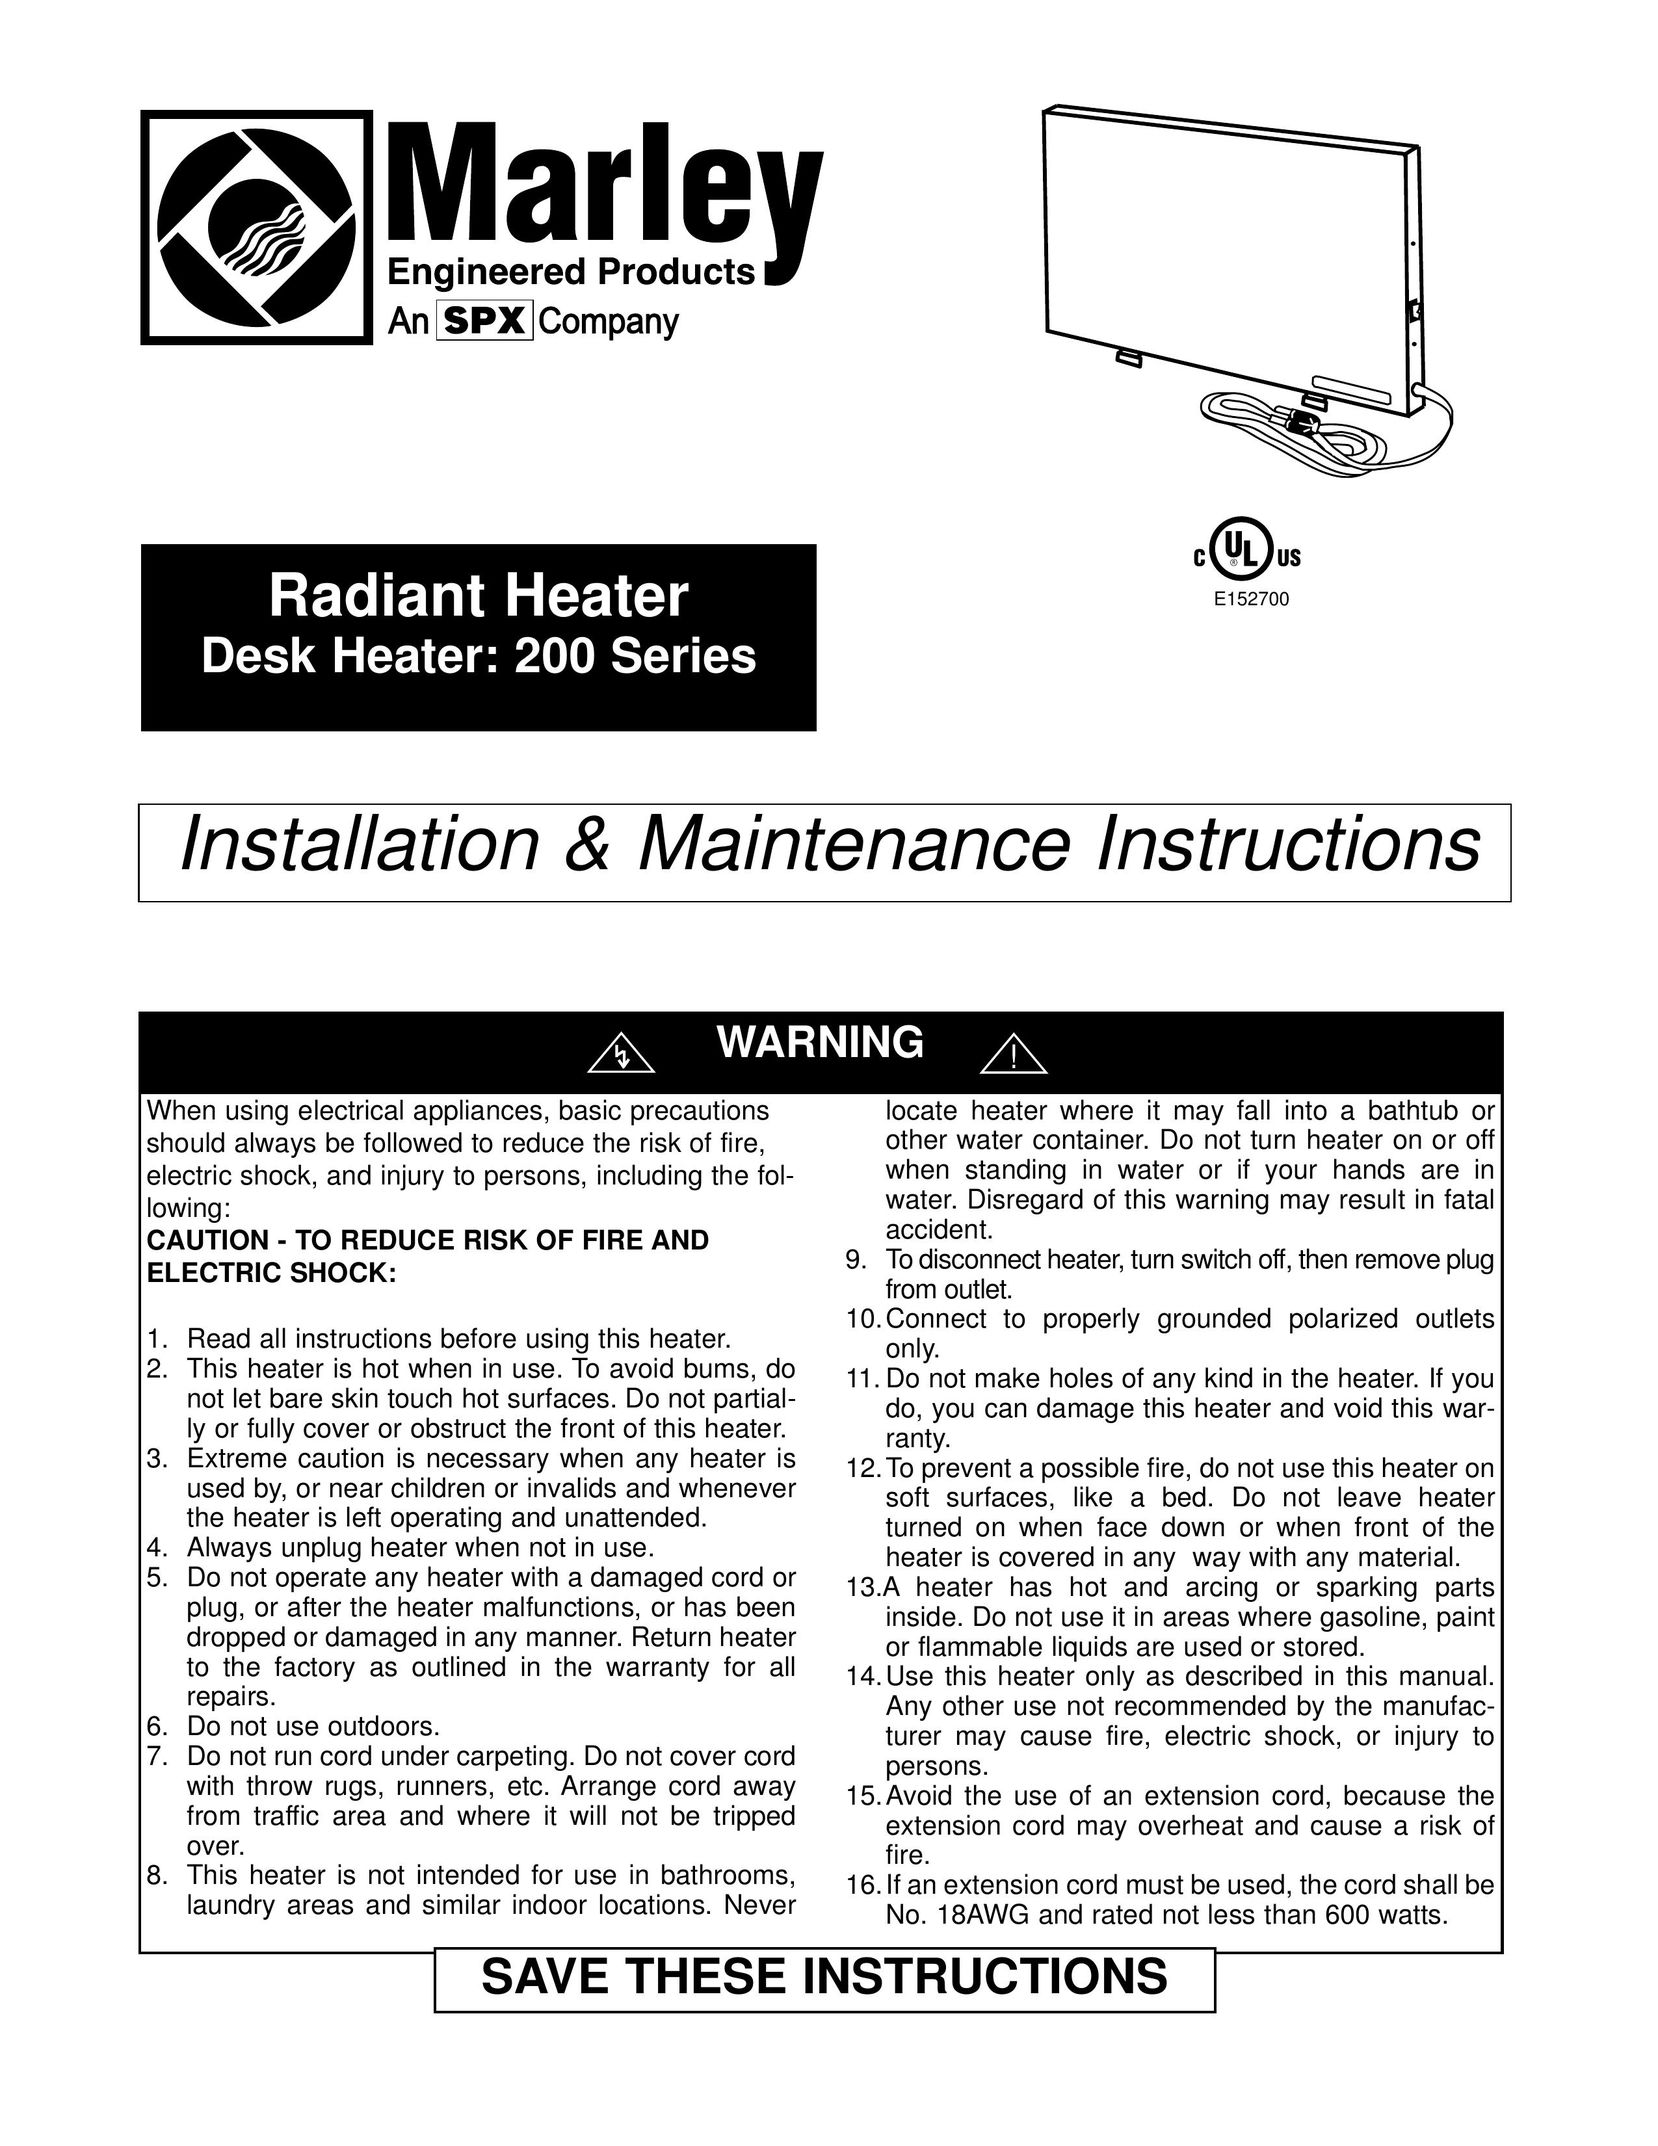 Marley Engineered Products Radiant Heater Electric Heater User Manual